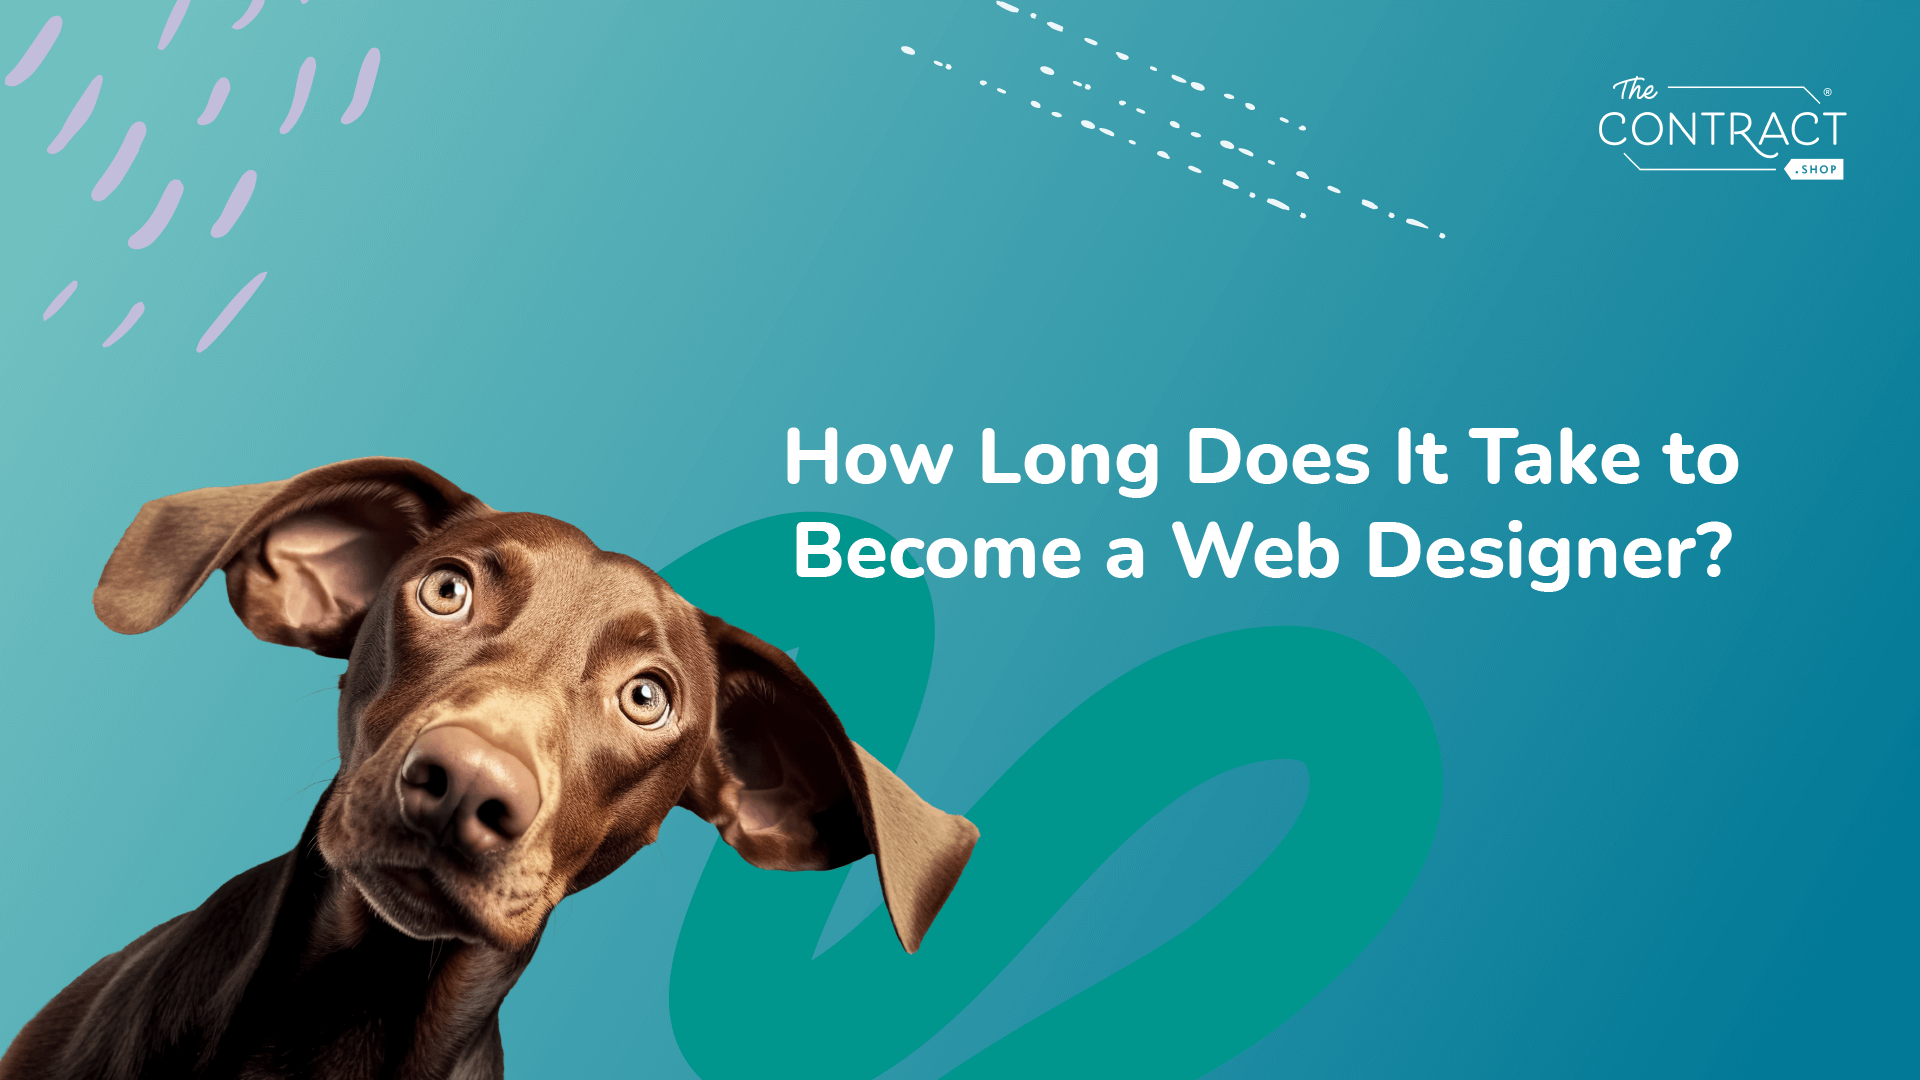 How Long Does It Take to Become a Web Designer?